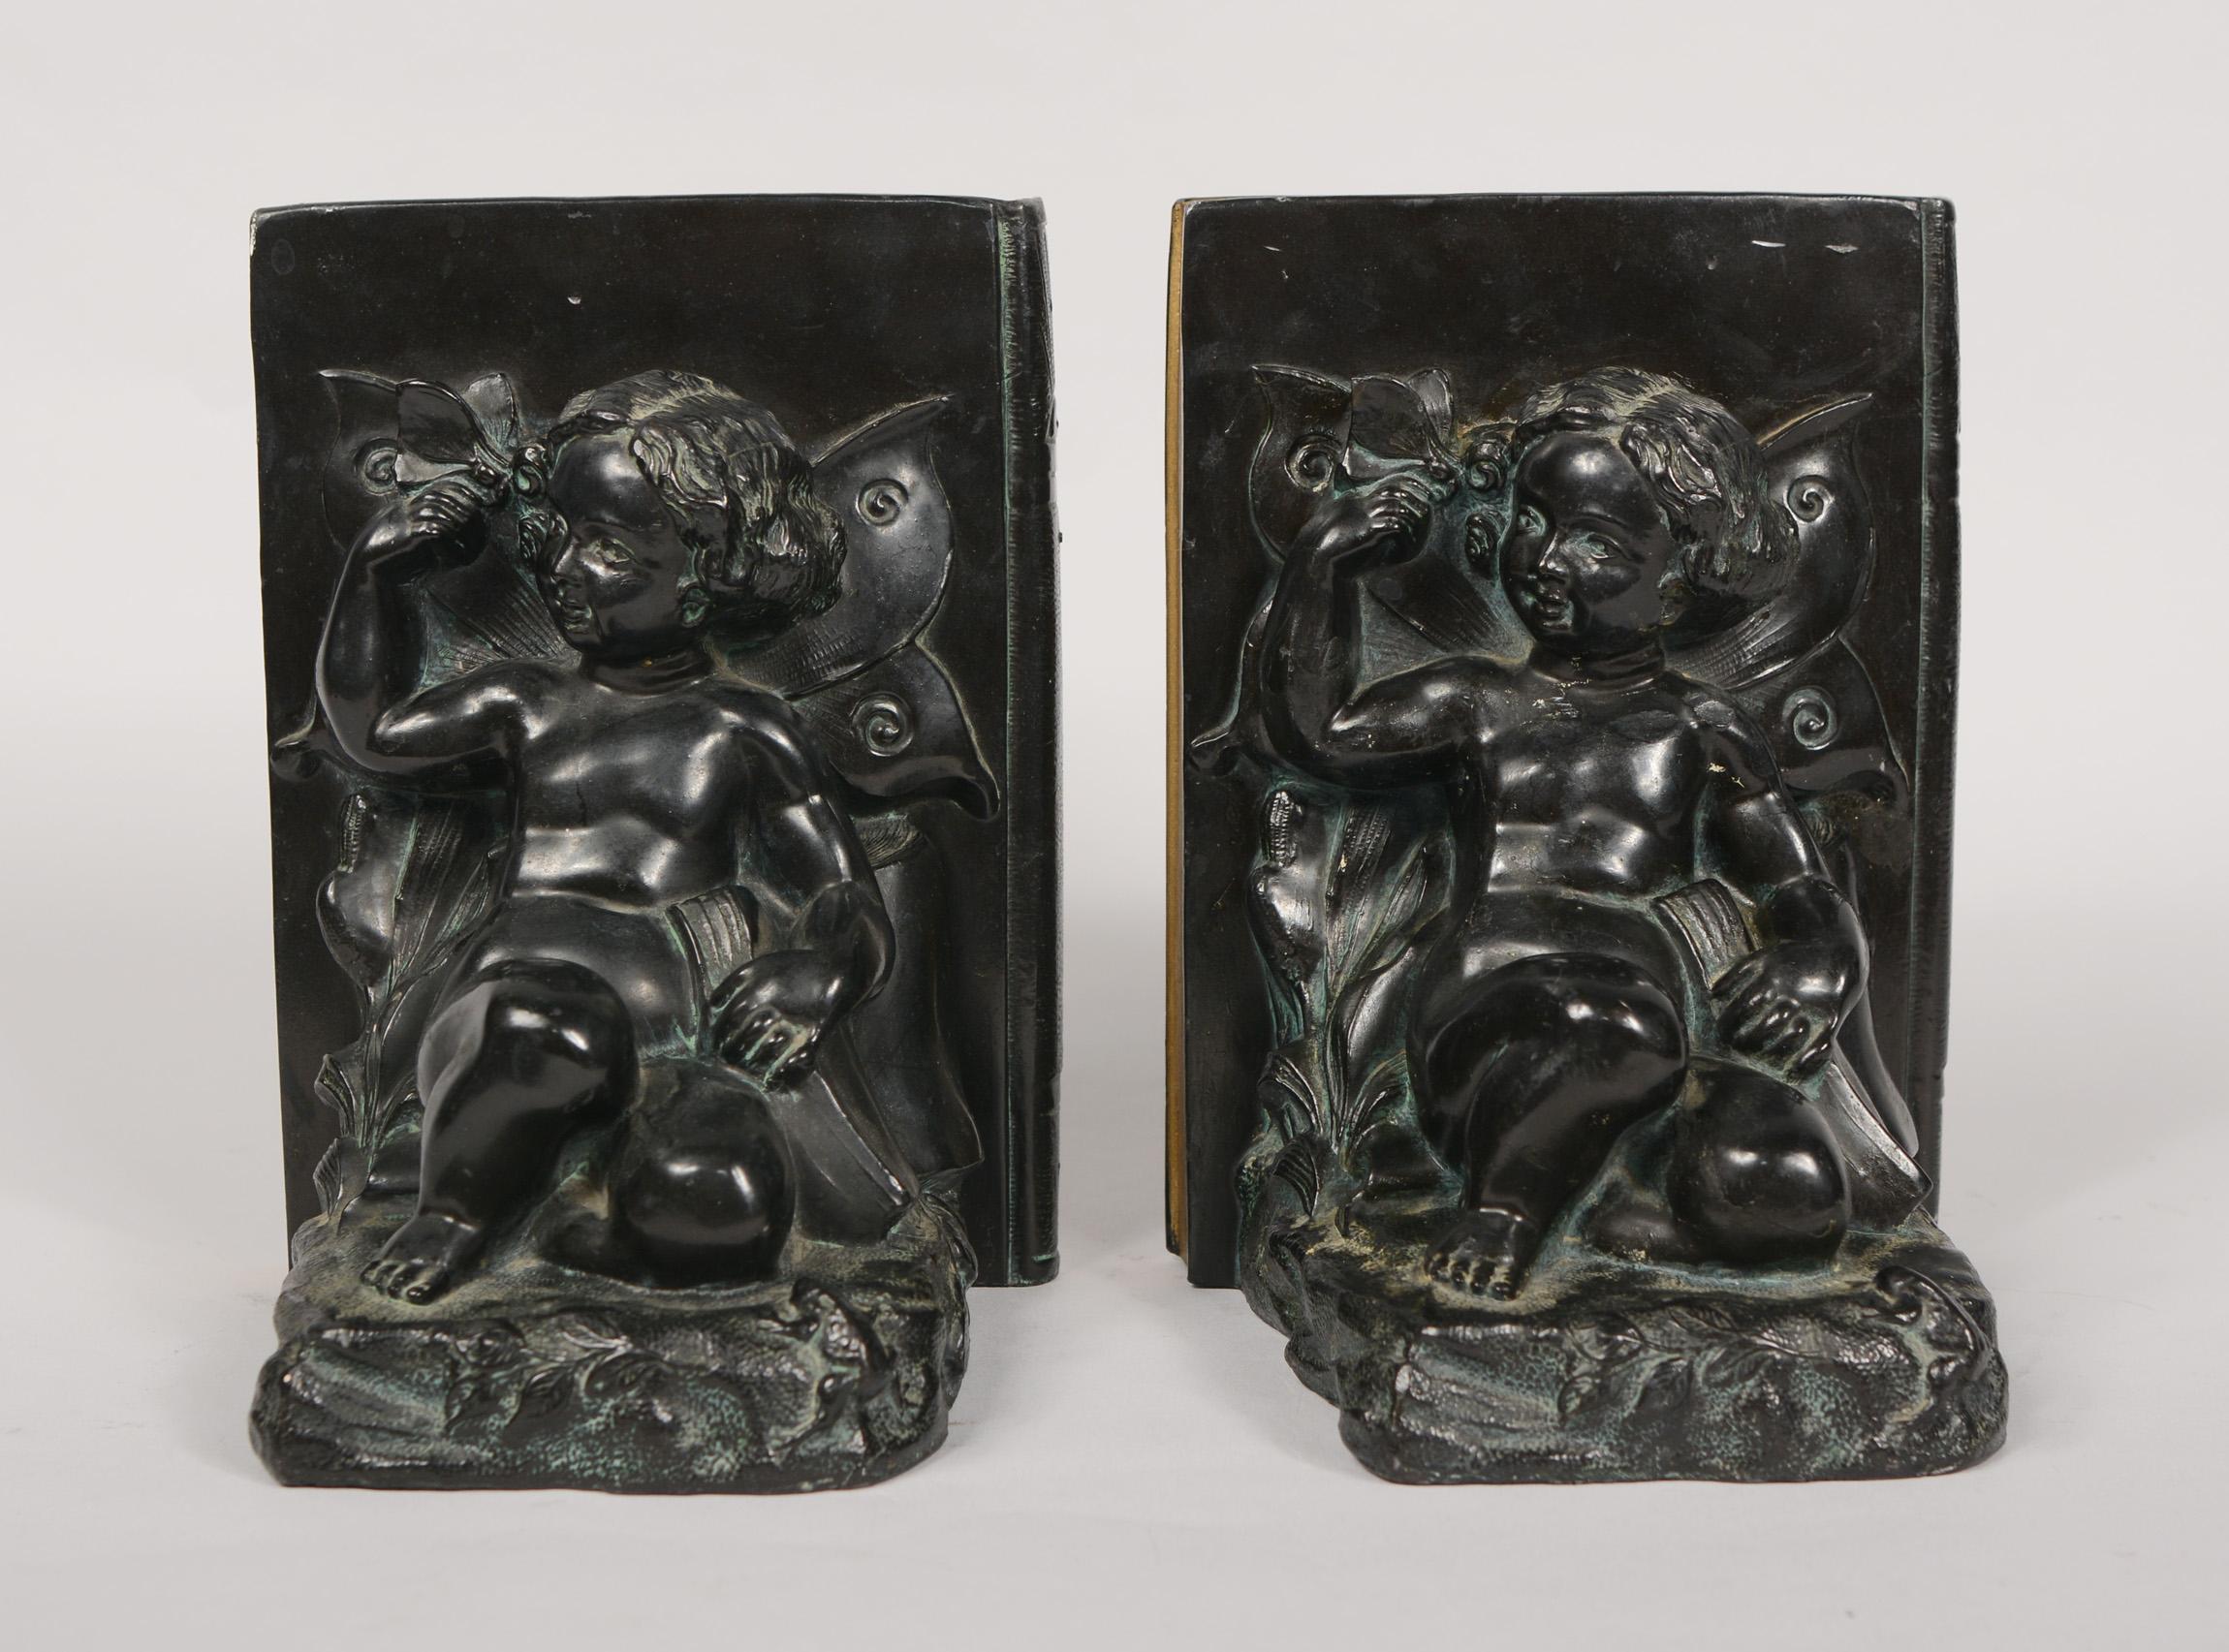 Pair of Art Nouveau Cherub and Butterfly Bookends by Ronson 1